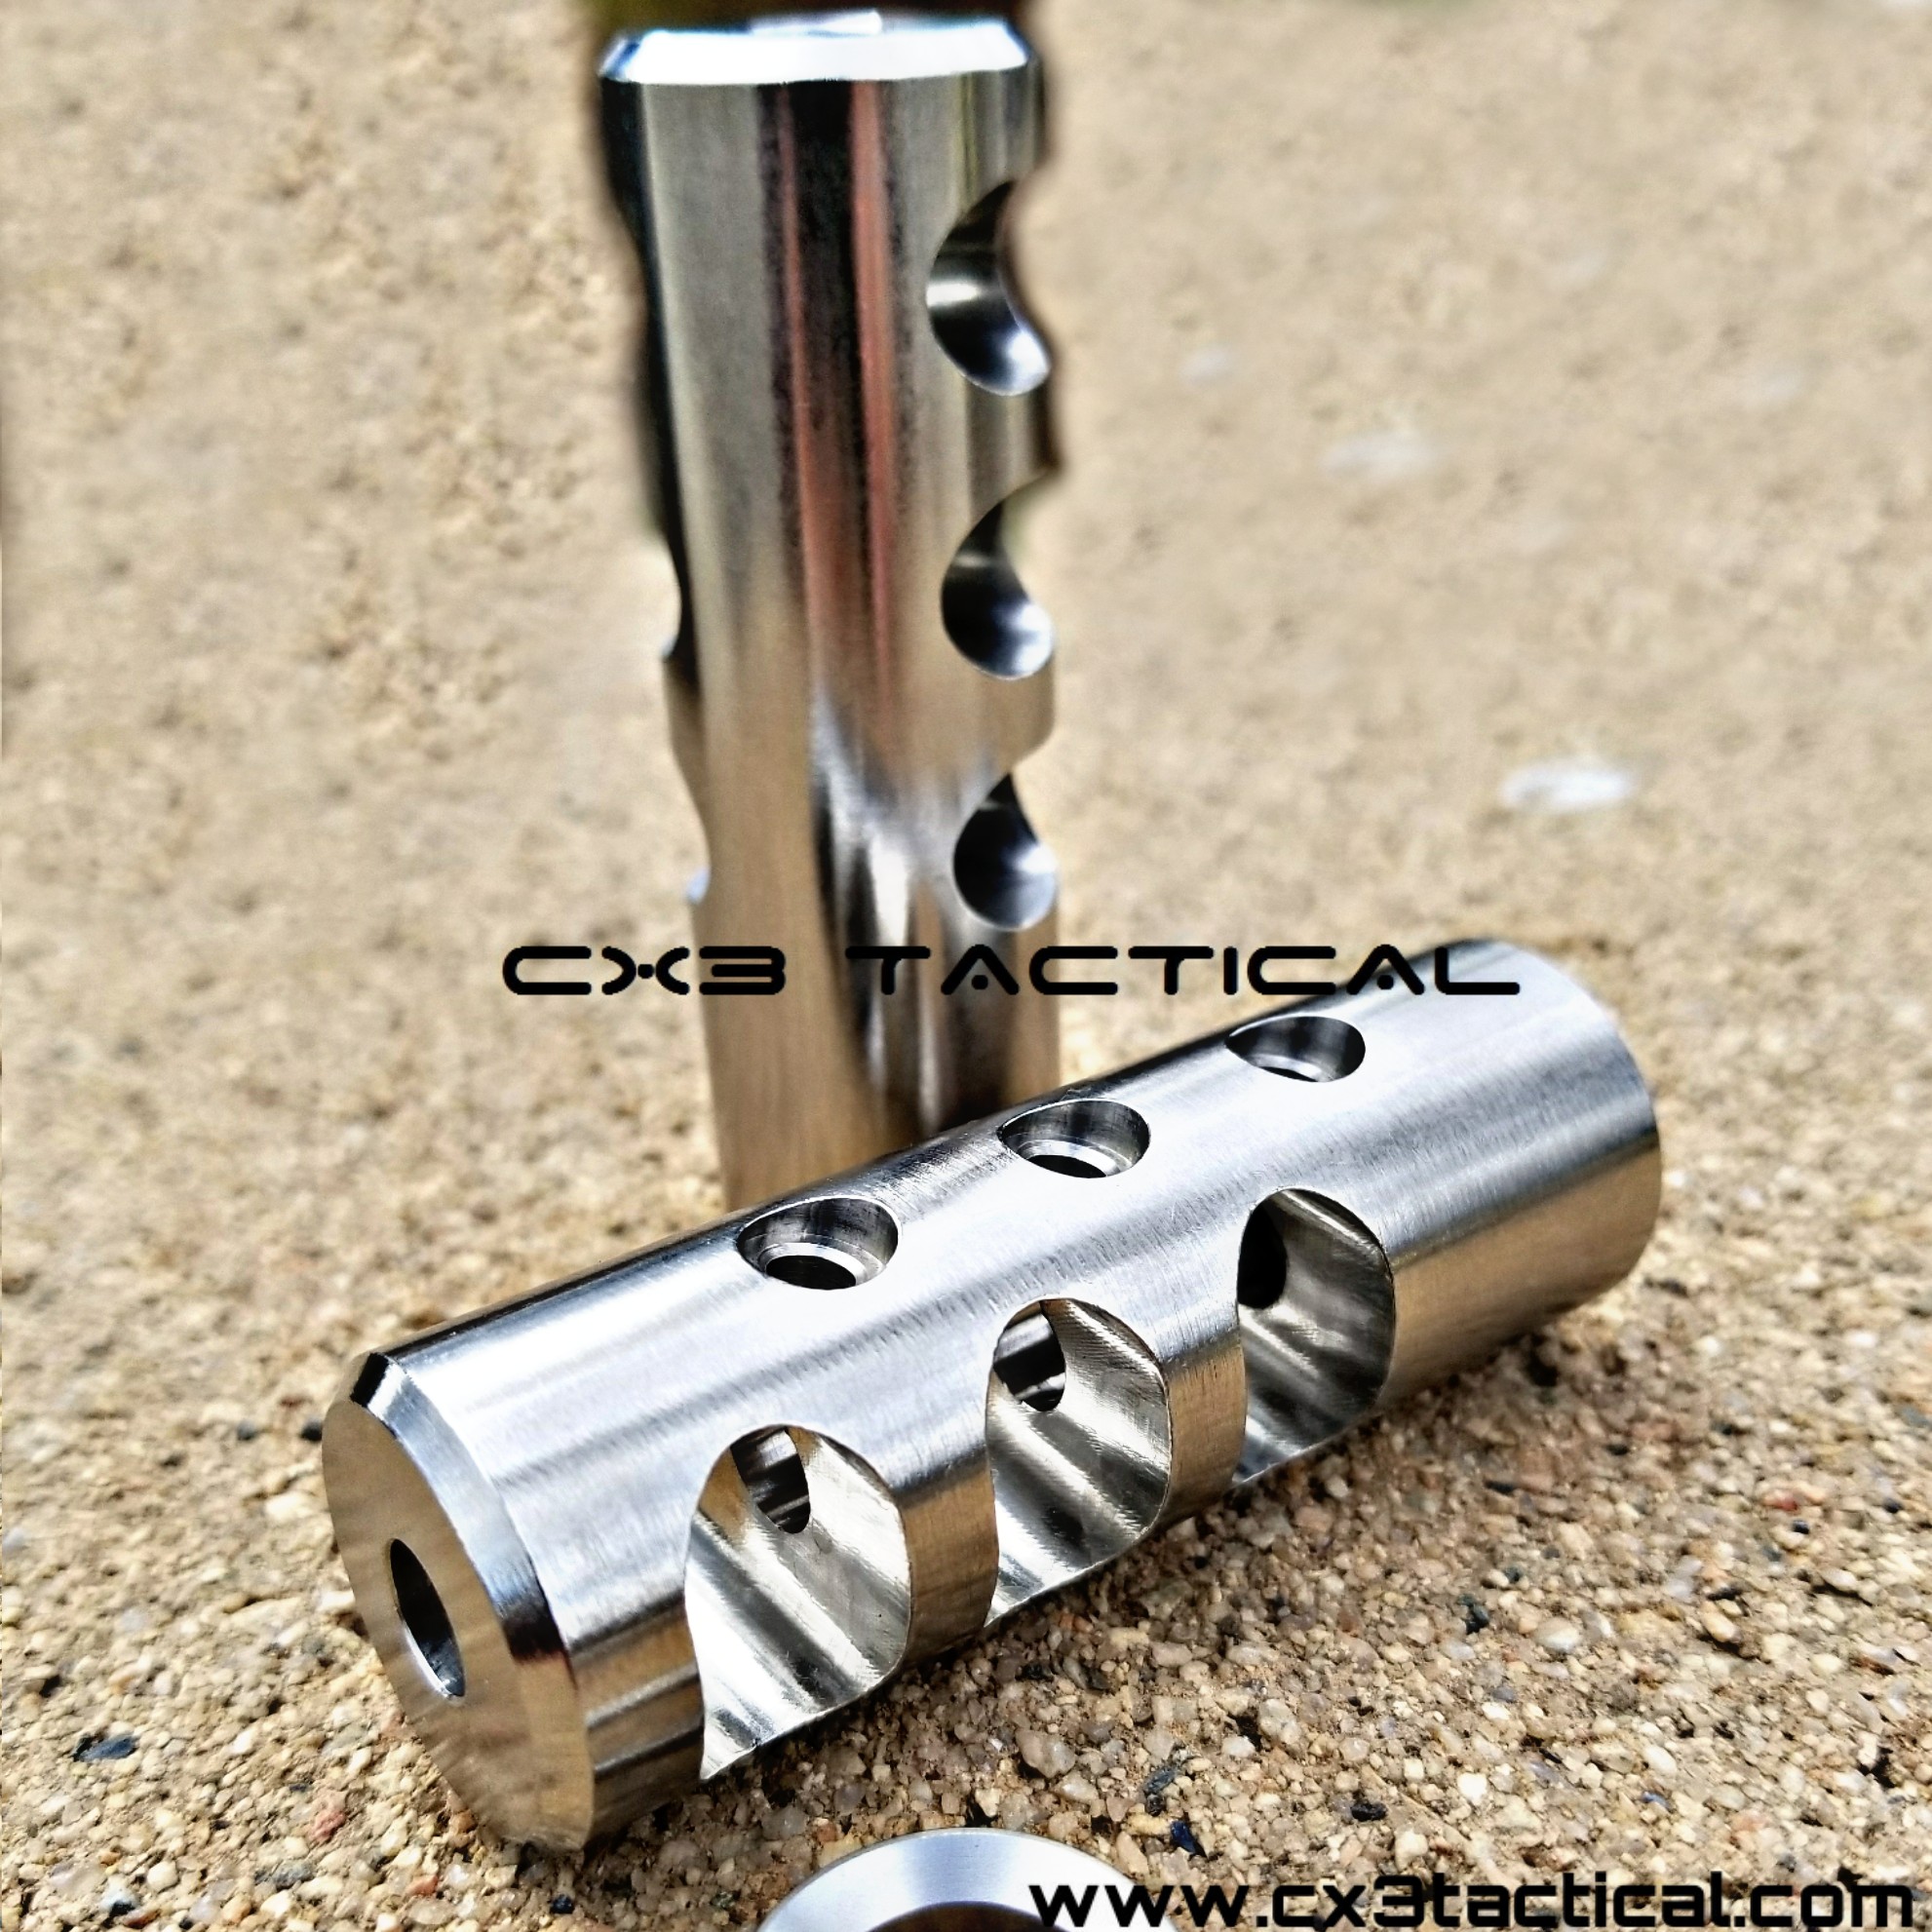 Stainless Steel 5/8-24 thread .30 cal muzzle brake 